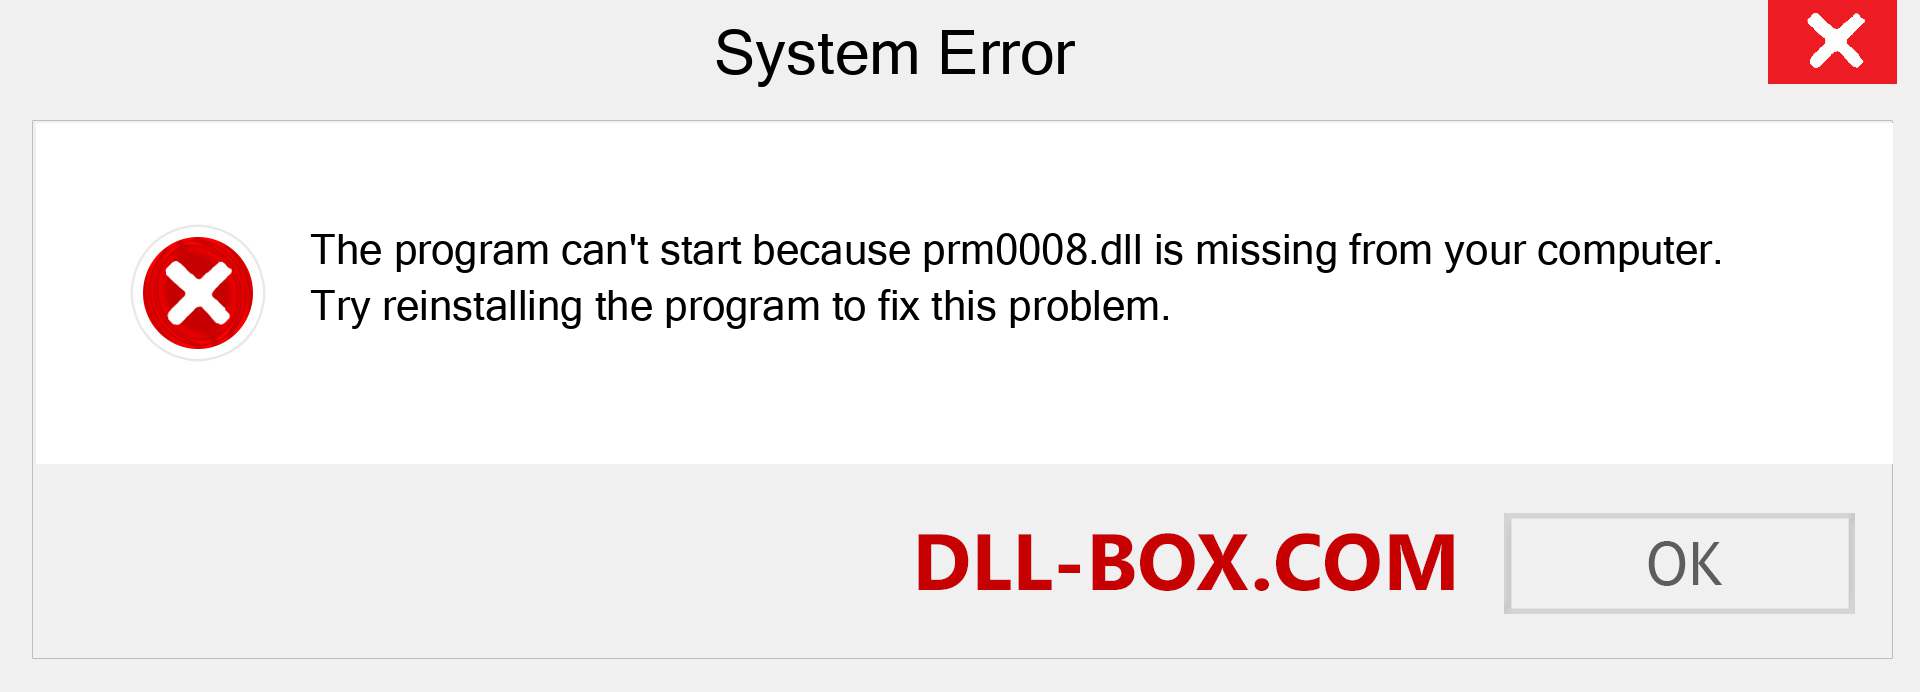  prm0008.dll file is missing?. Download for Windows 7, 8, 10 - Fix  prm0008 dll Missing Error on Windows, photos, images